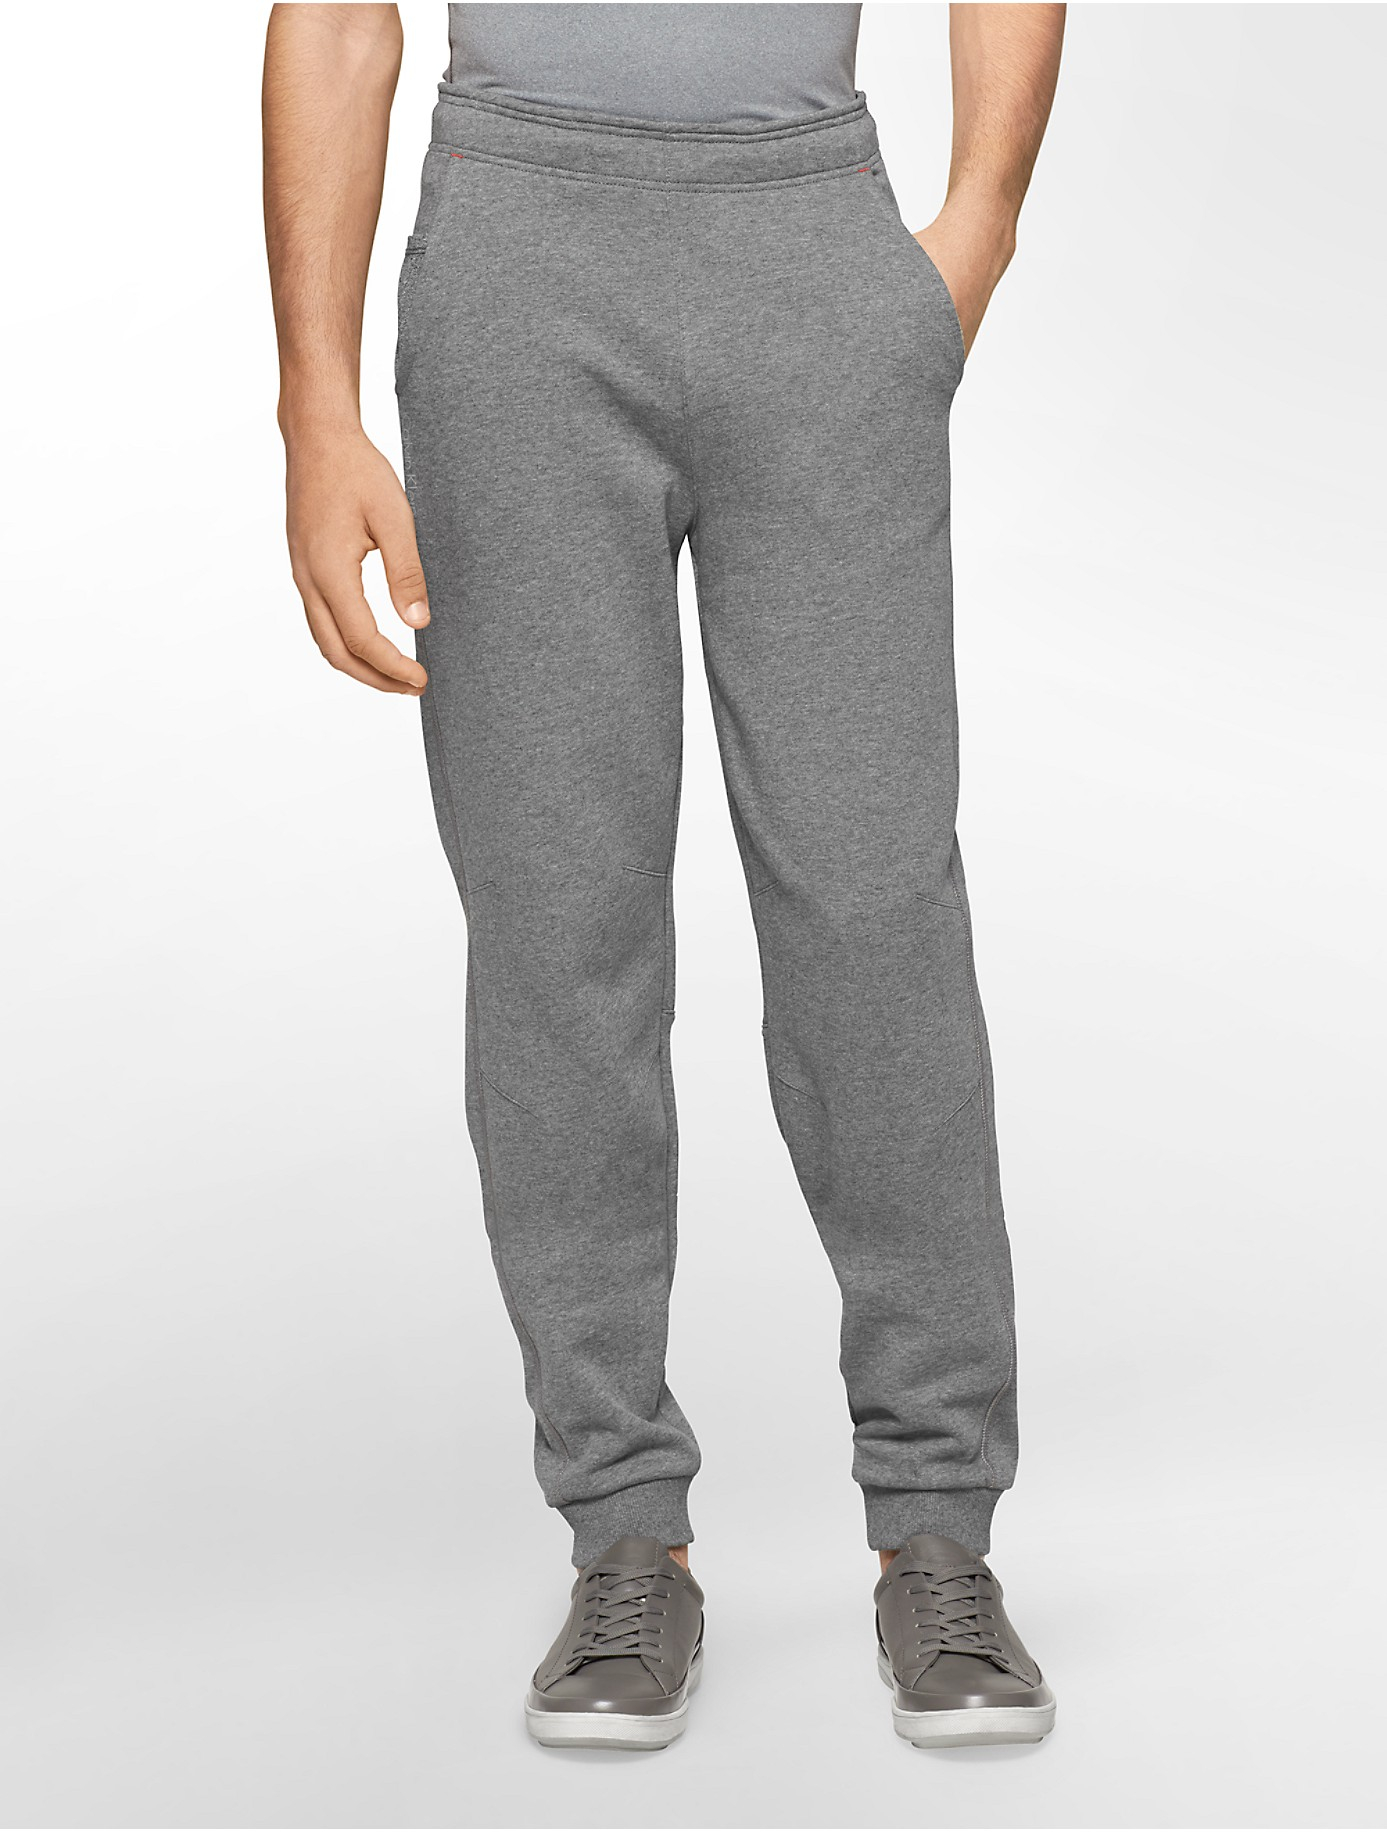 Calvin klein White Label Performance Tapered Fleece Sweatpants in Gray ...